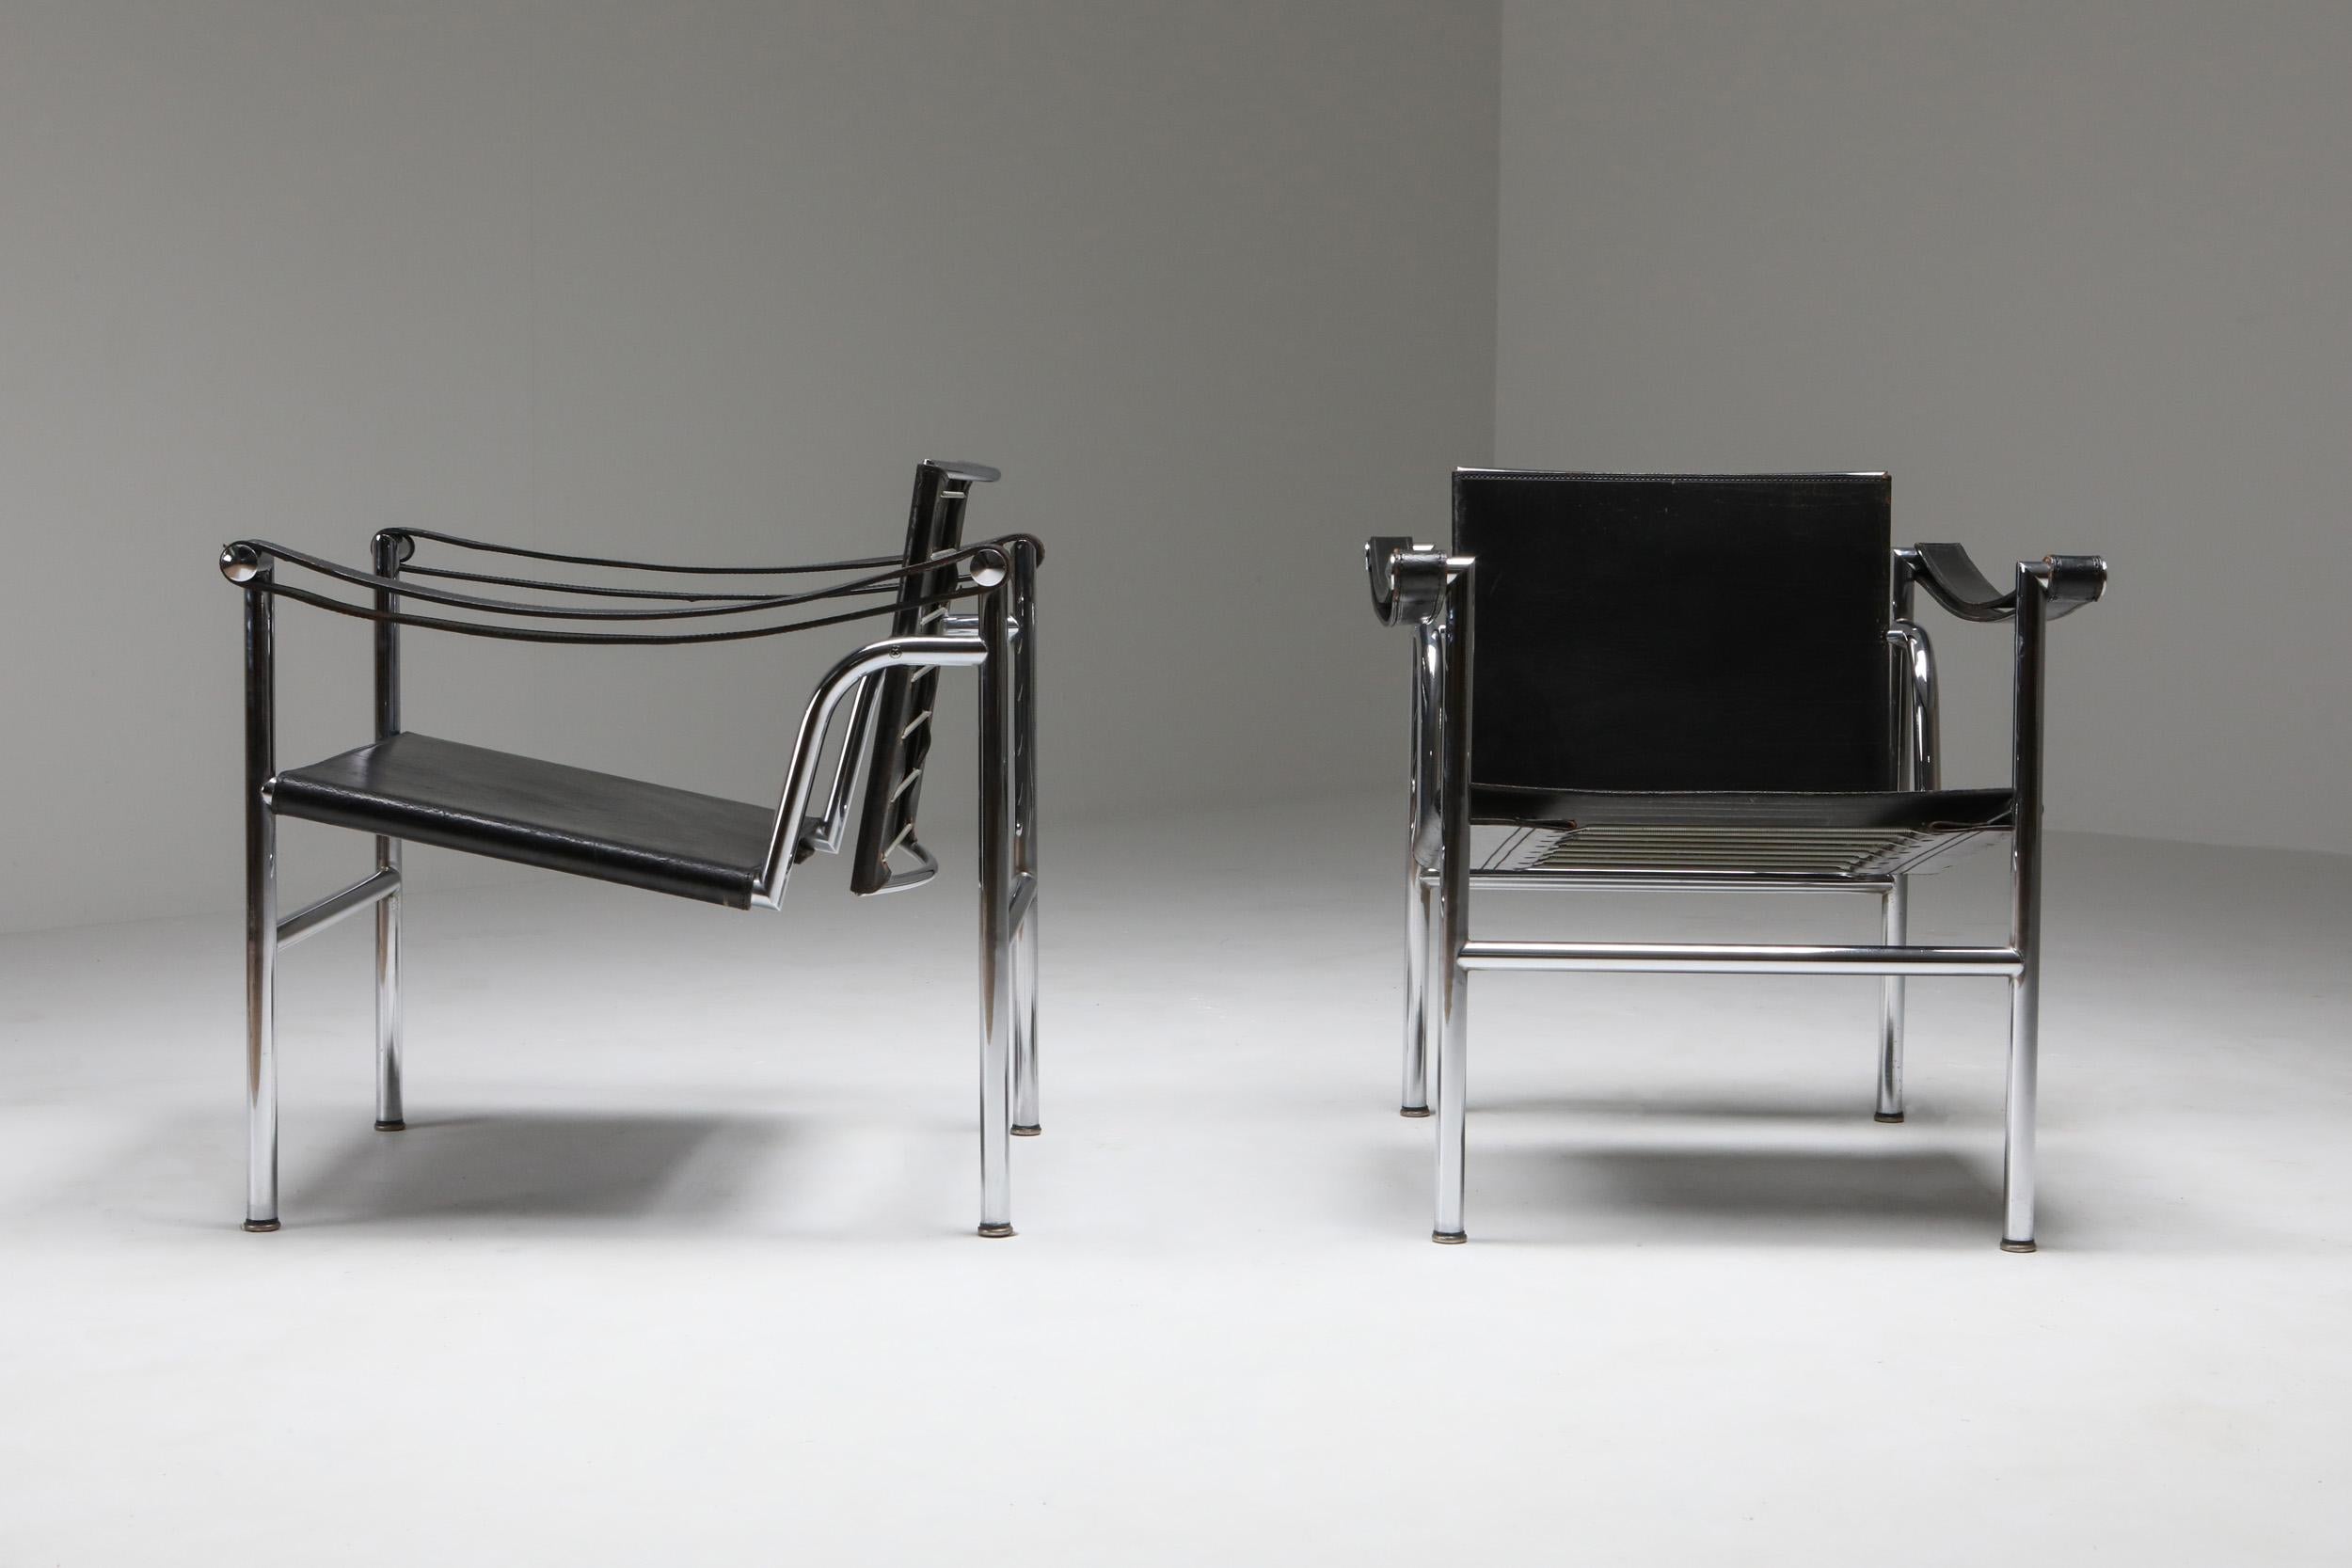 Le Corbusier, LC 1, black leather, pre cassina, 1965

A light, compact chair designed and presented at the 1929 Salon d’Automne along with other important models, such as the LC2 and LC3 armchairs, the LC6 table and the LC4 chaise-longue. As with